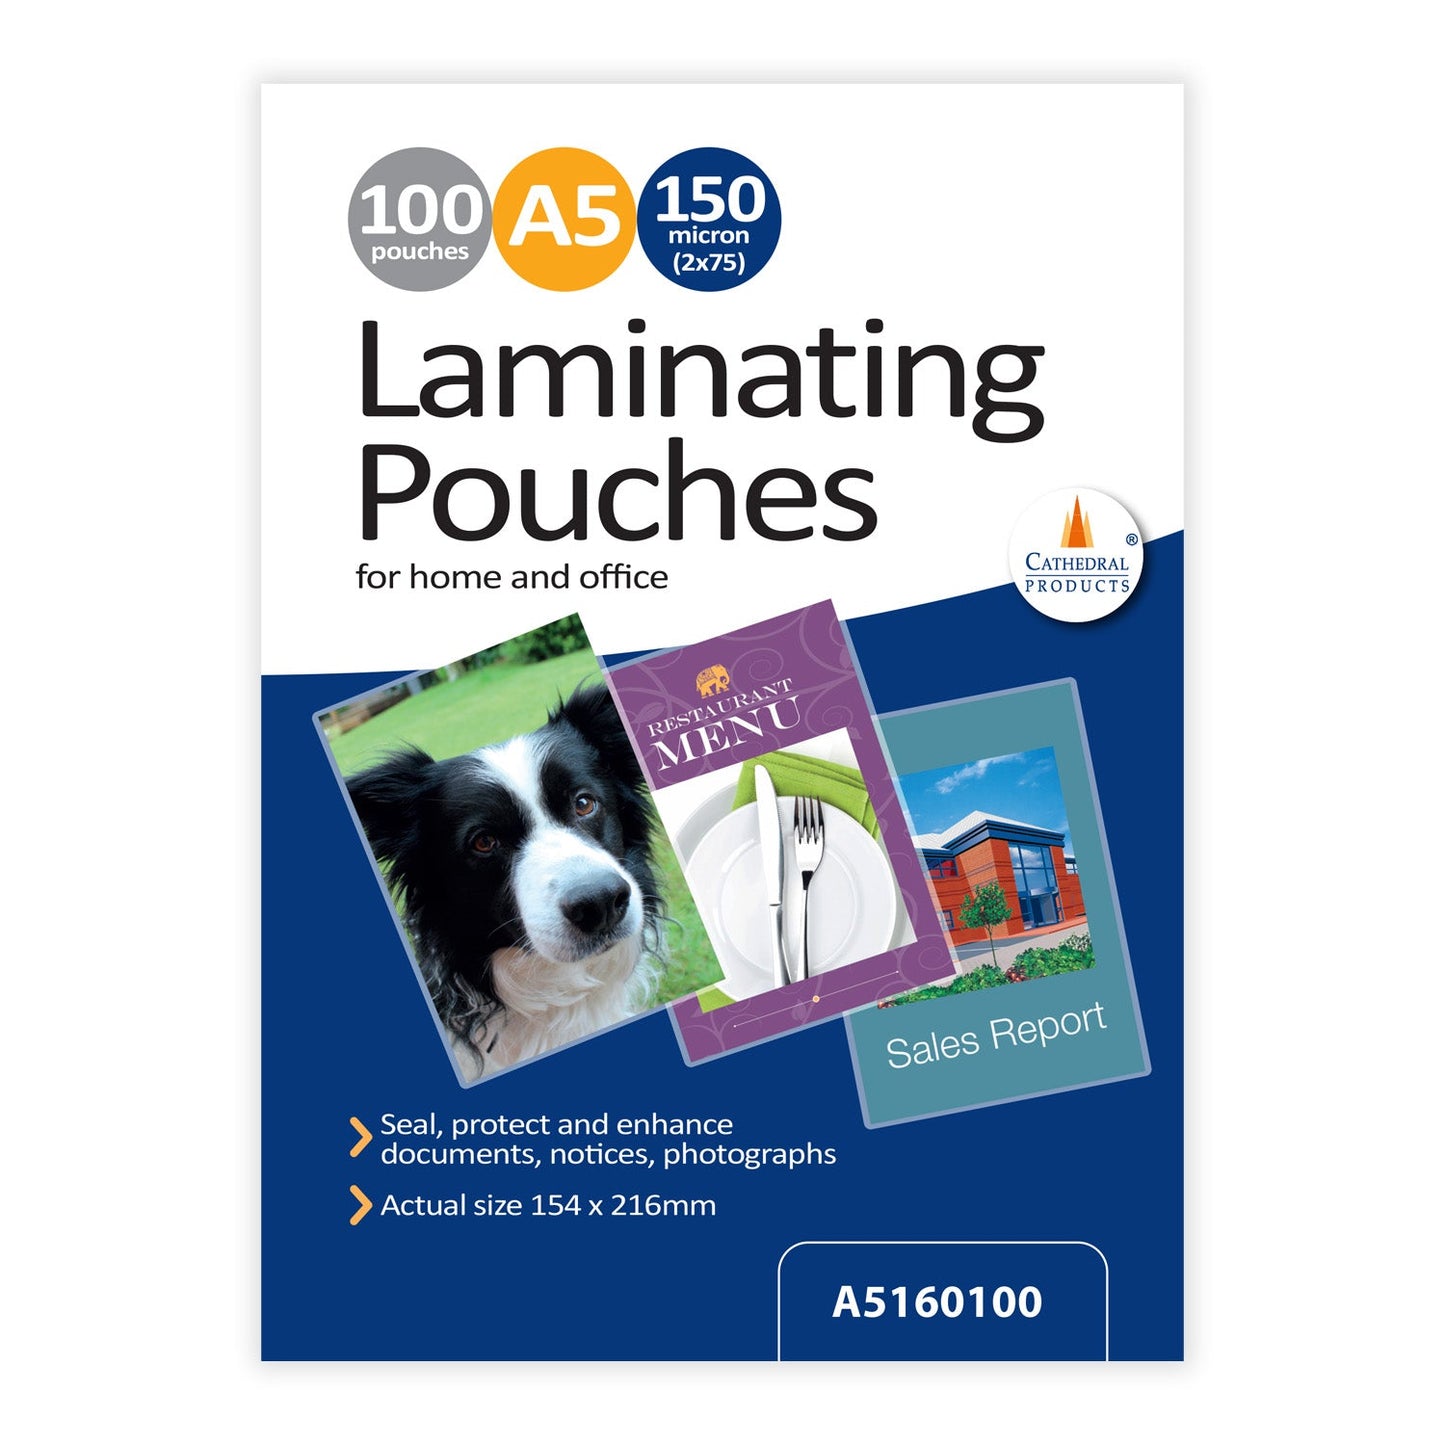 Package of Cathedral Products A5 gloss laminating pouches, 150 micron thickness, showing 100 pouches suitable for documents, notices, and photographs, with examples of a laminated dog photo, restaurant menu, and sales report on the front.